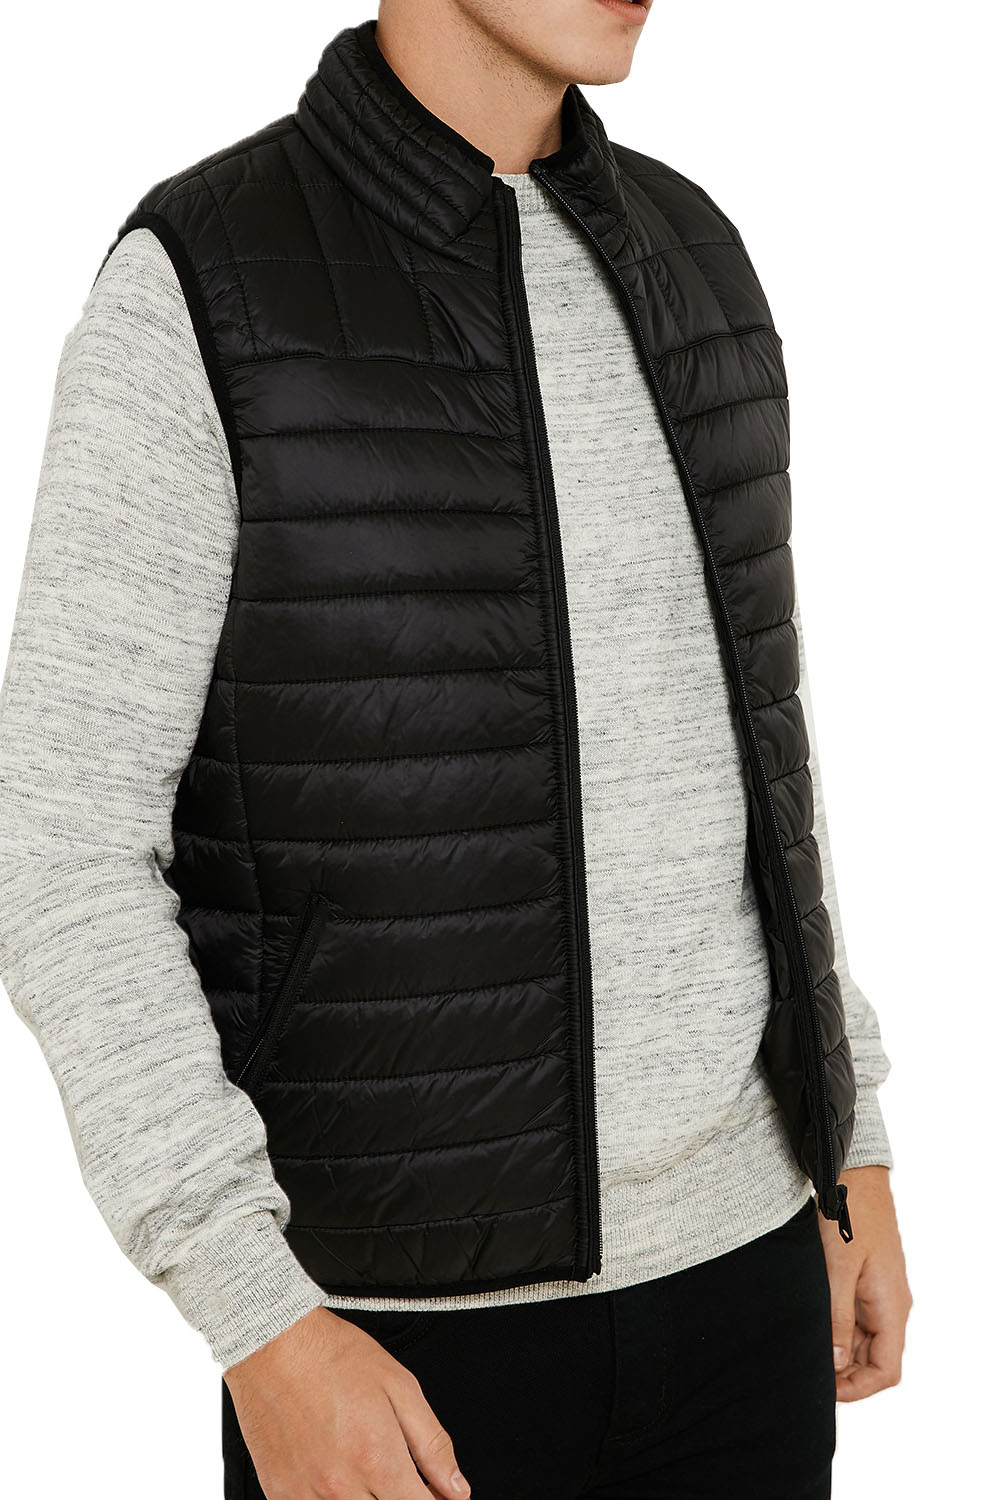 Threadbare Magpie Mens Vest Lightweight Quilted Padded Puffer ...